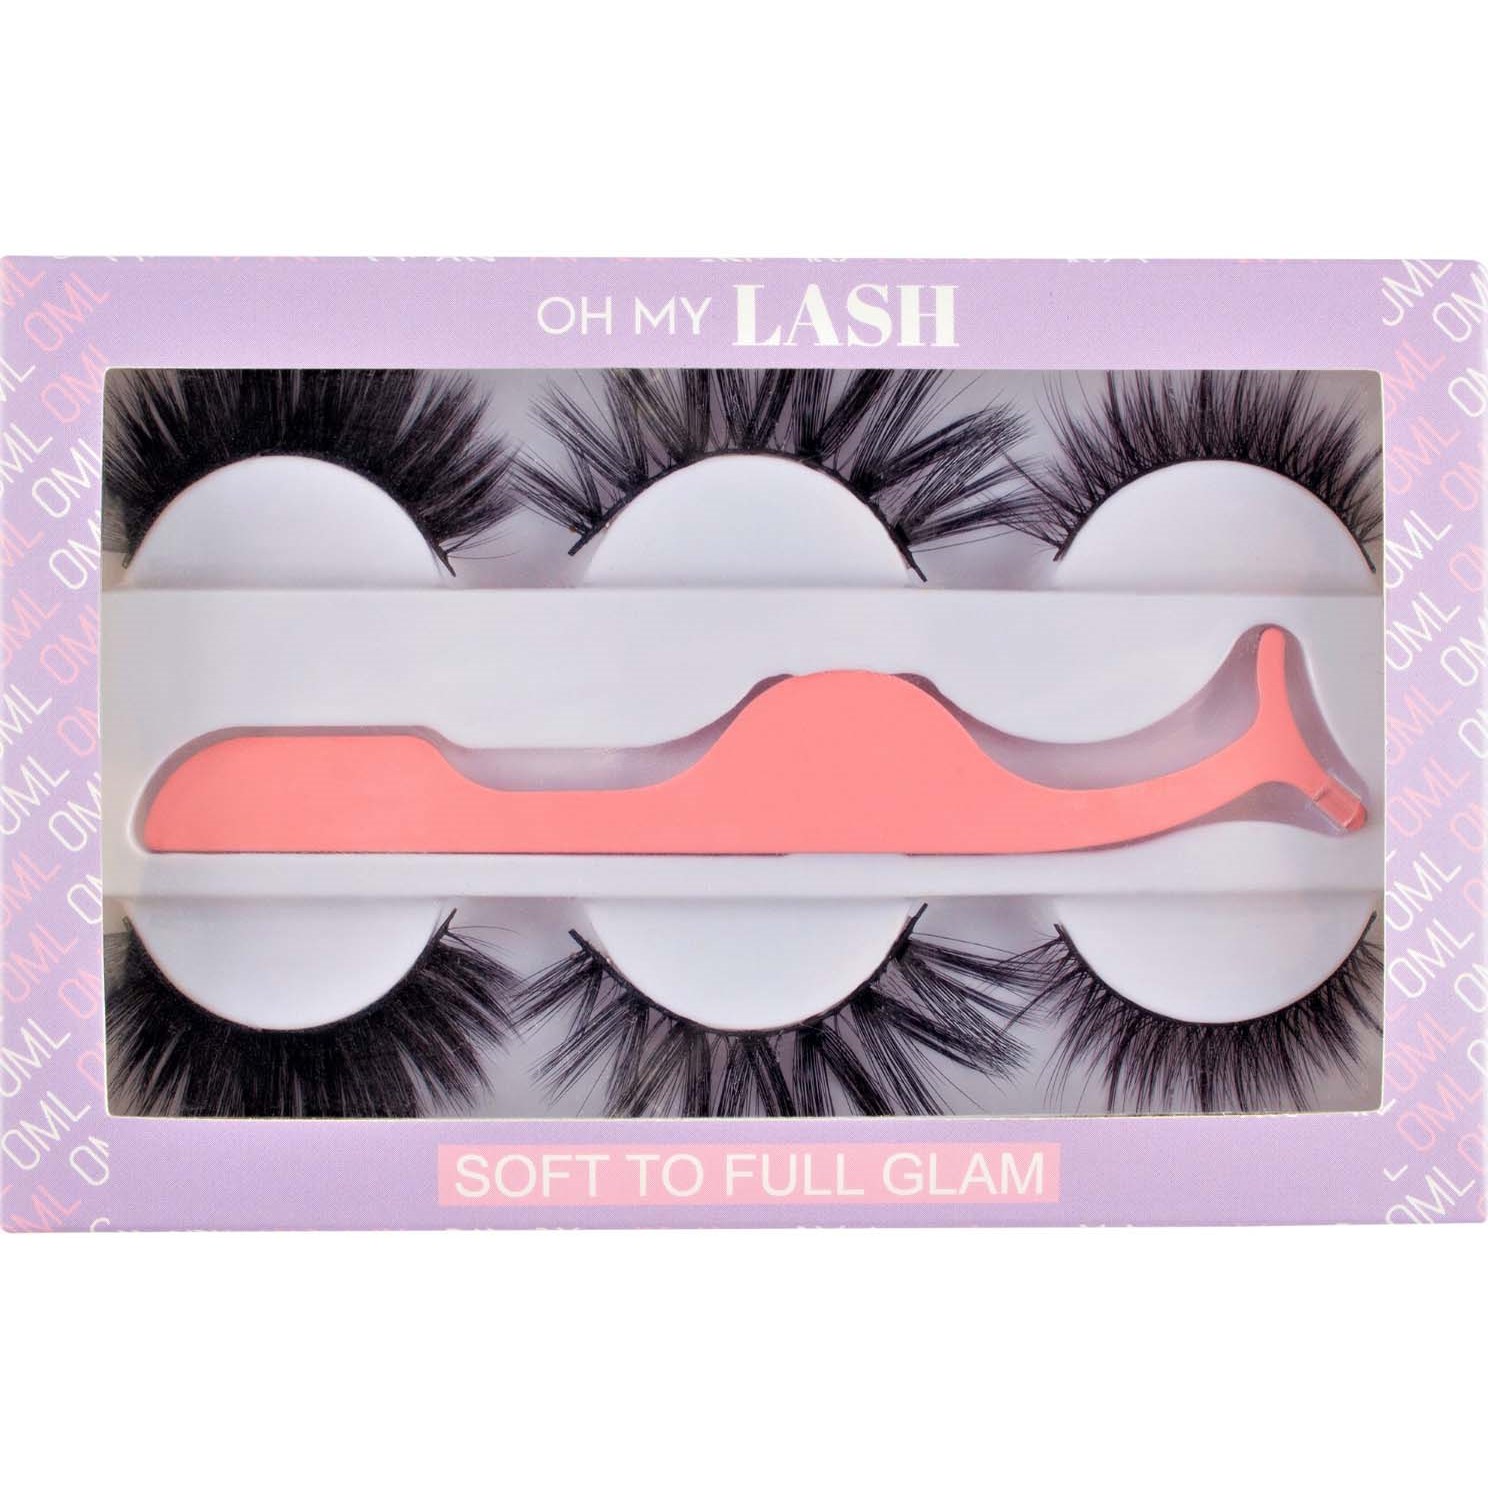 Oh My Lash Faux Mink Strip Lashes Soft To Full Glam Set 4Pc (3 X